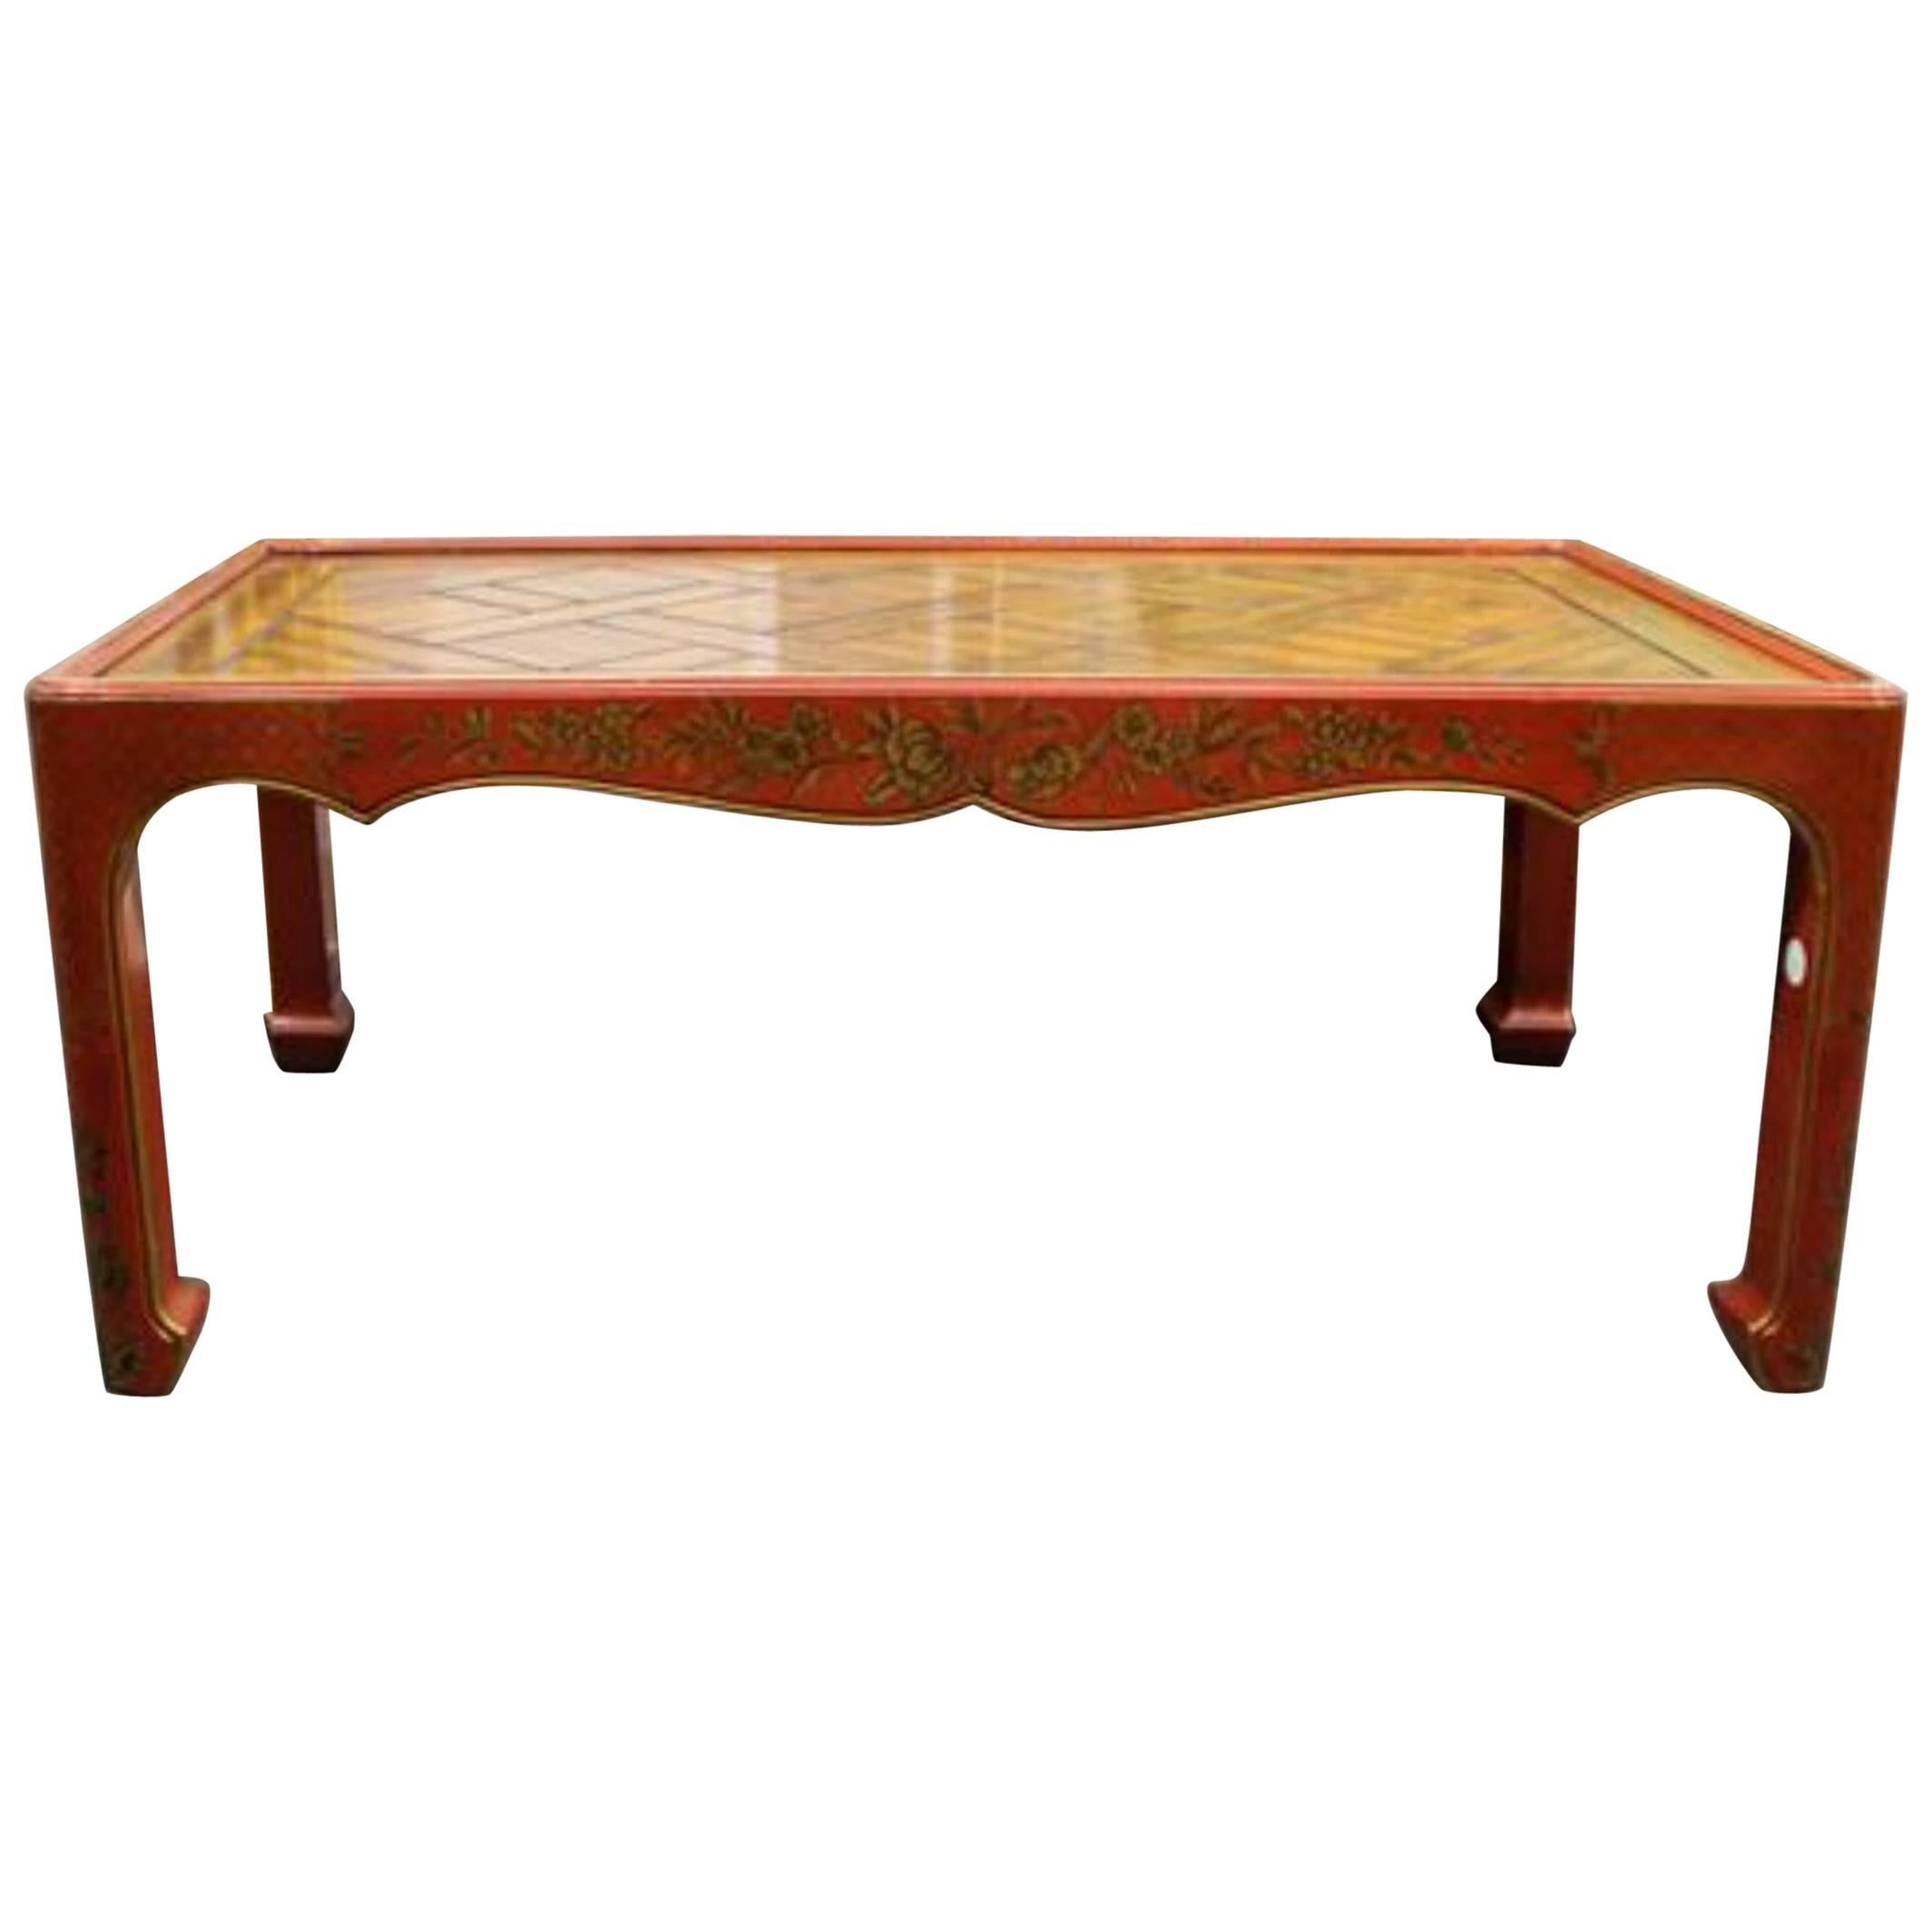 Chinoiserie Decorated Low Table